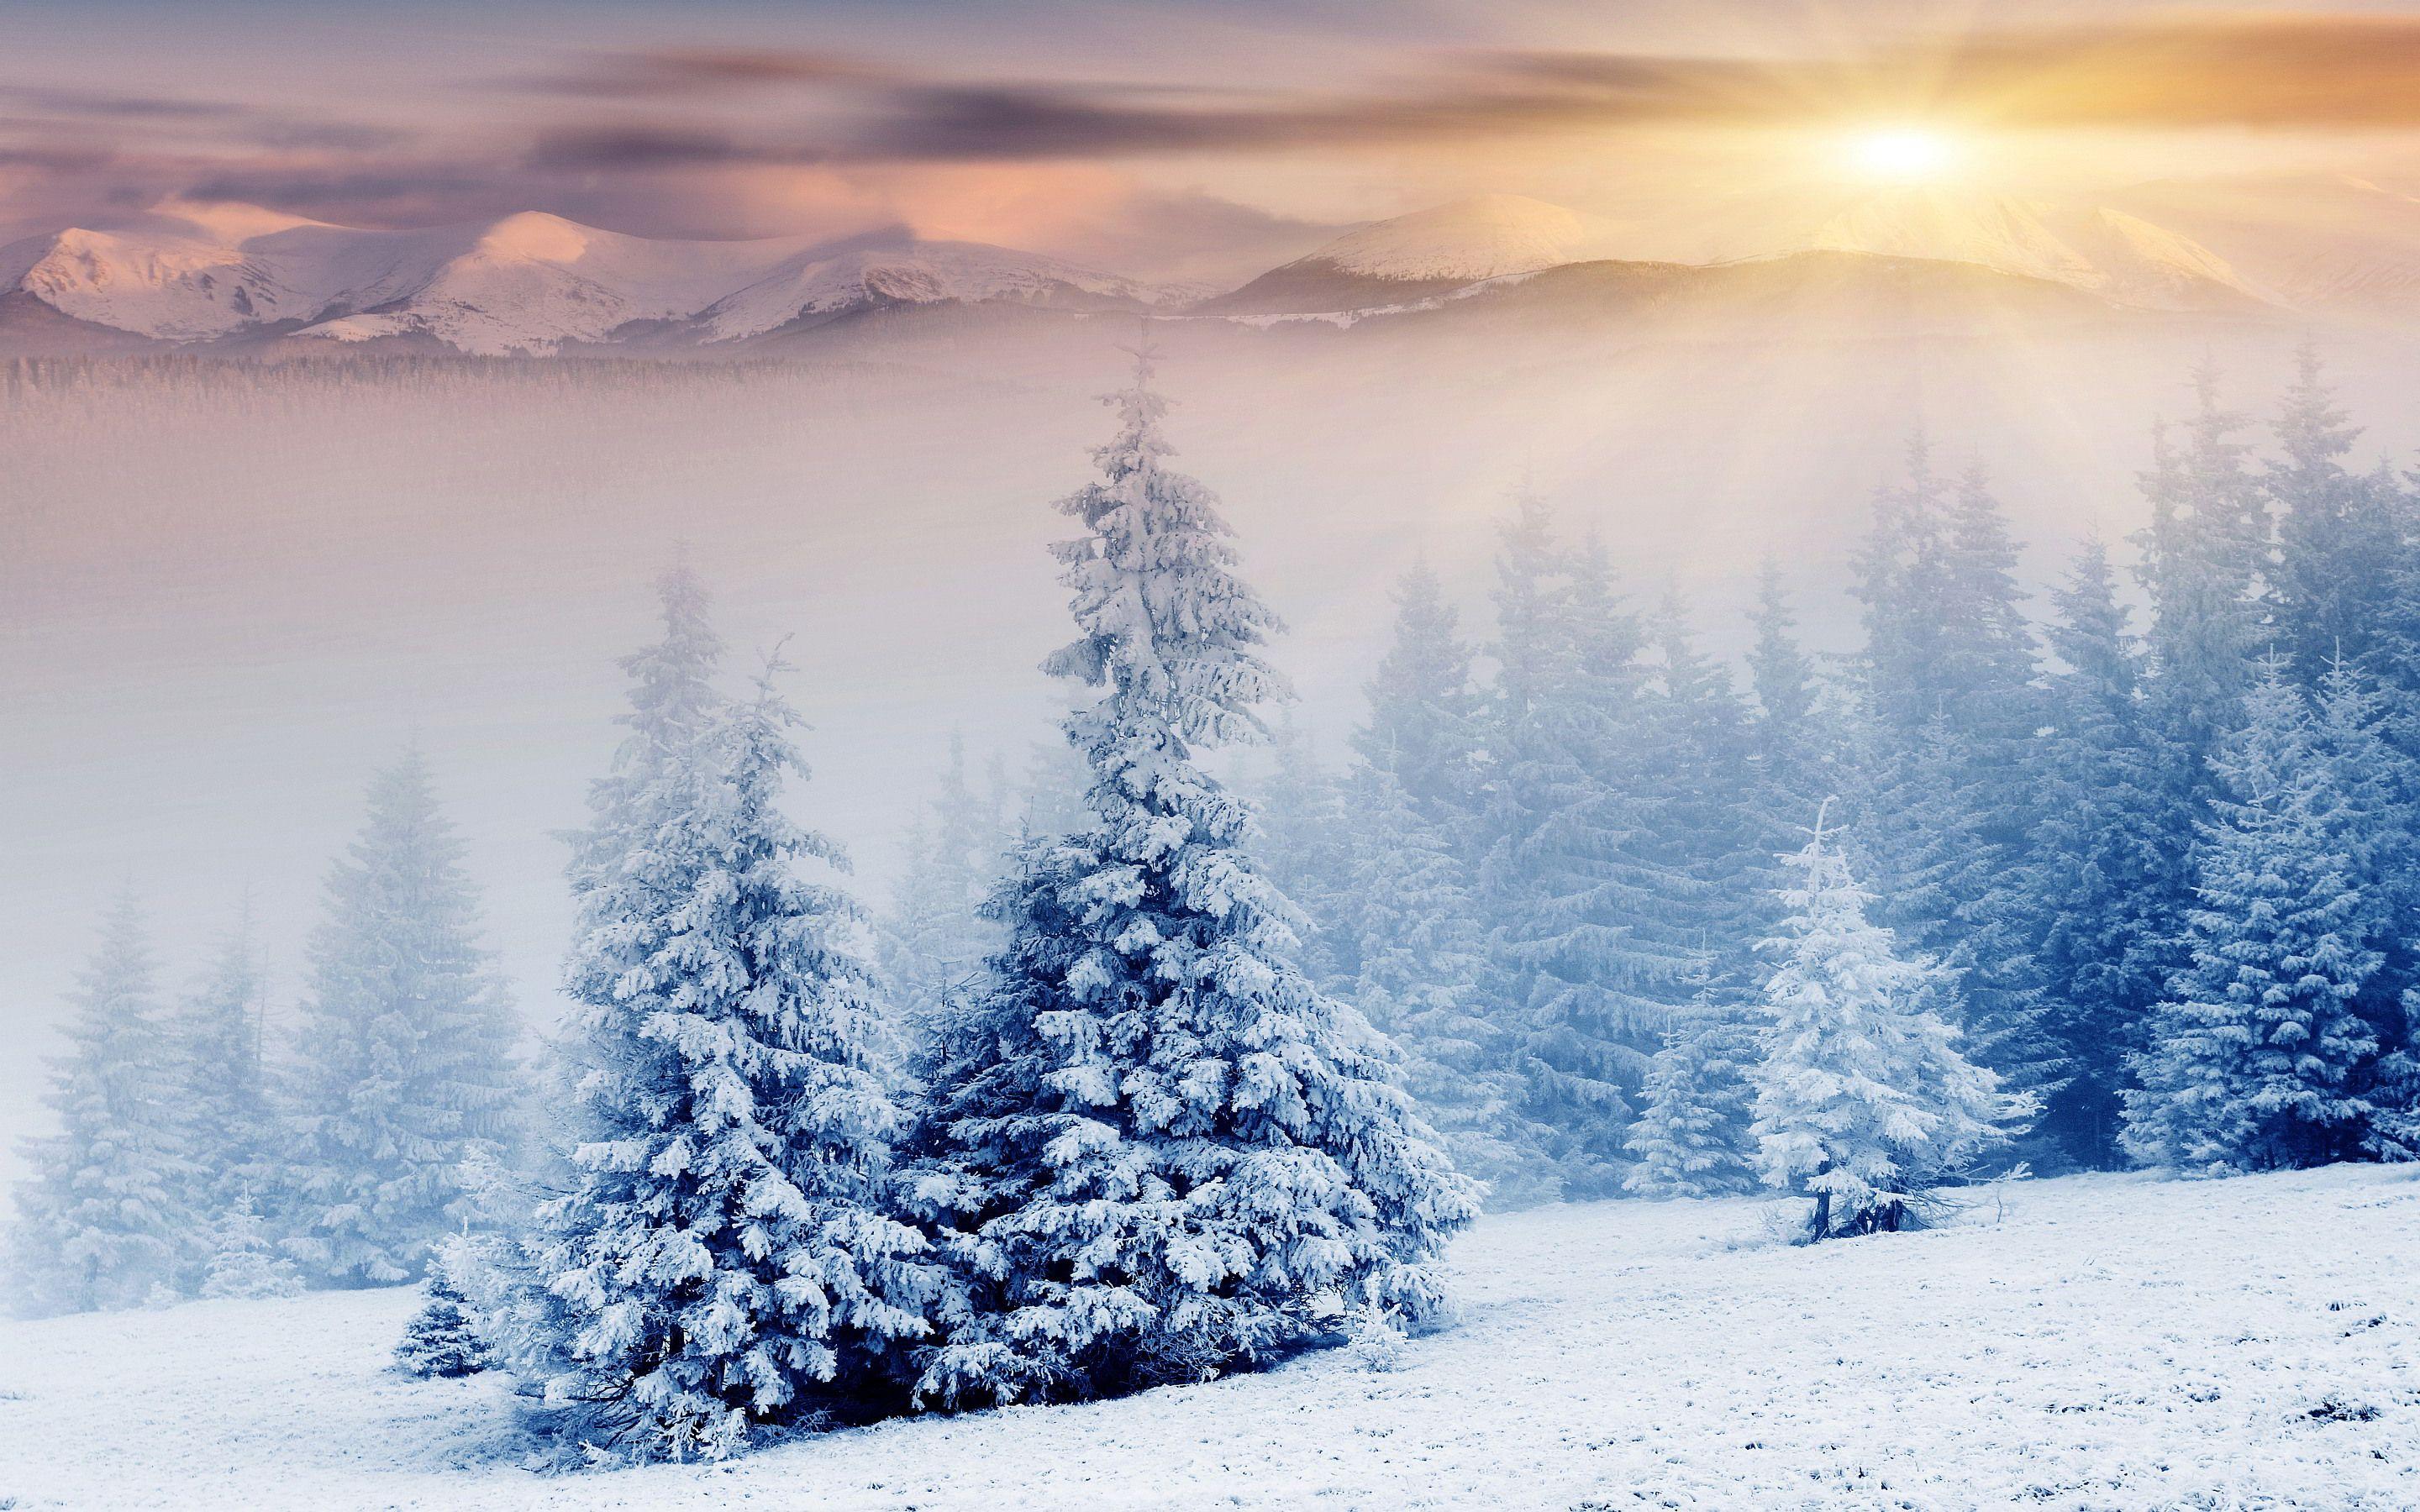 Winter Snow Wallpapers Hd Pics Widescreen For Iphone ~ Gipsypixel